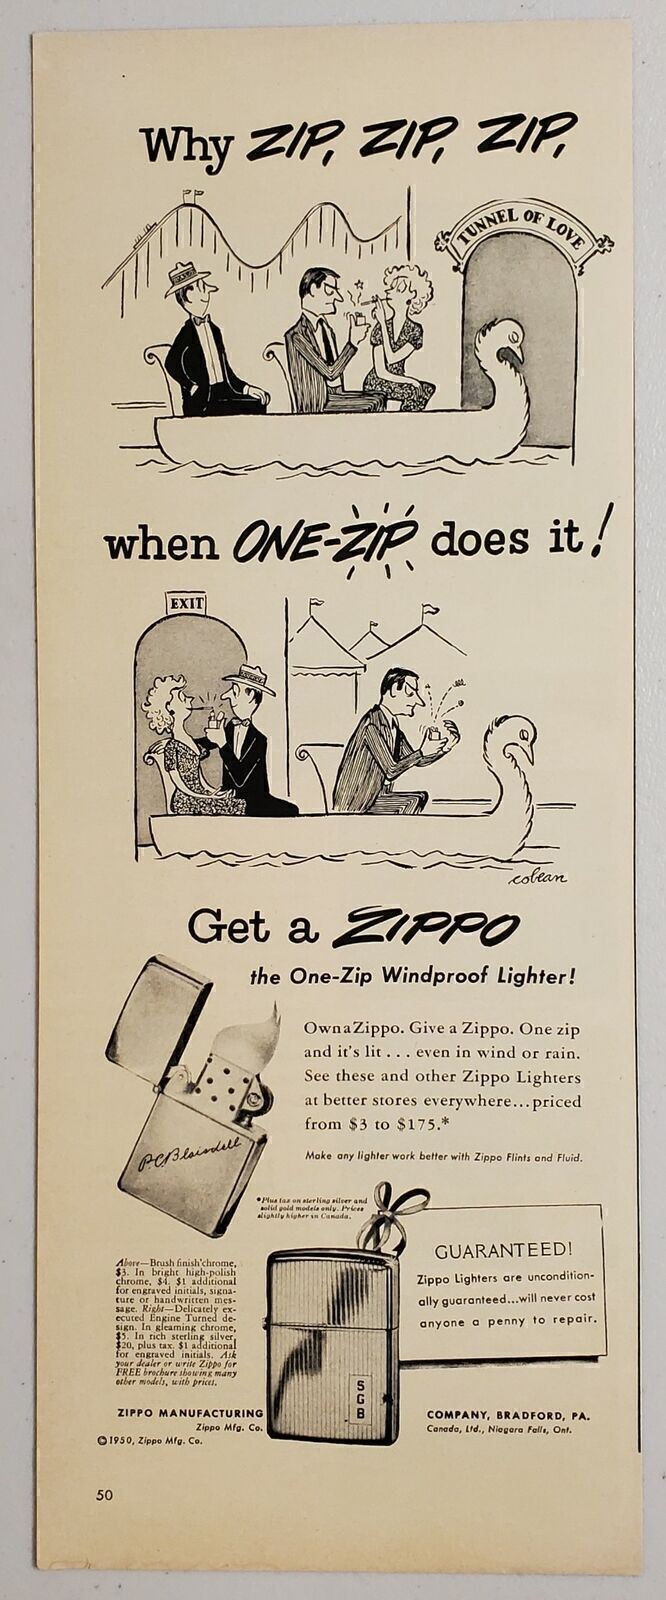 1950 Magazine Ad Zippo Windproof Lighters Couples in Tunnel of Love Cartoon